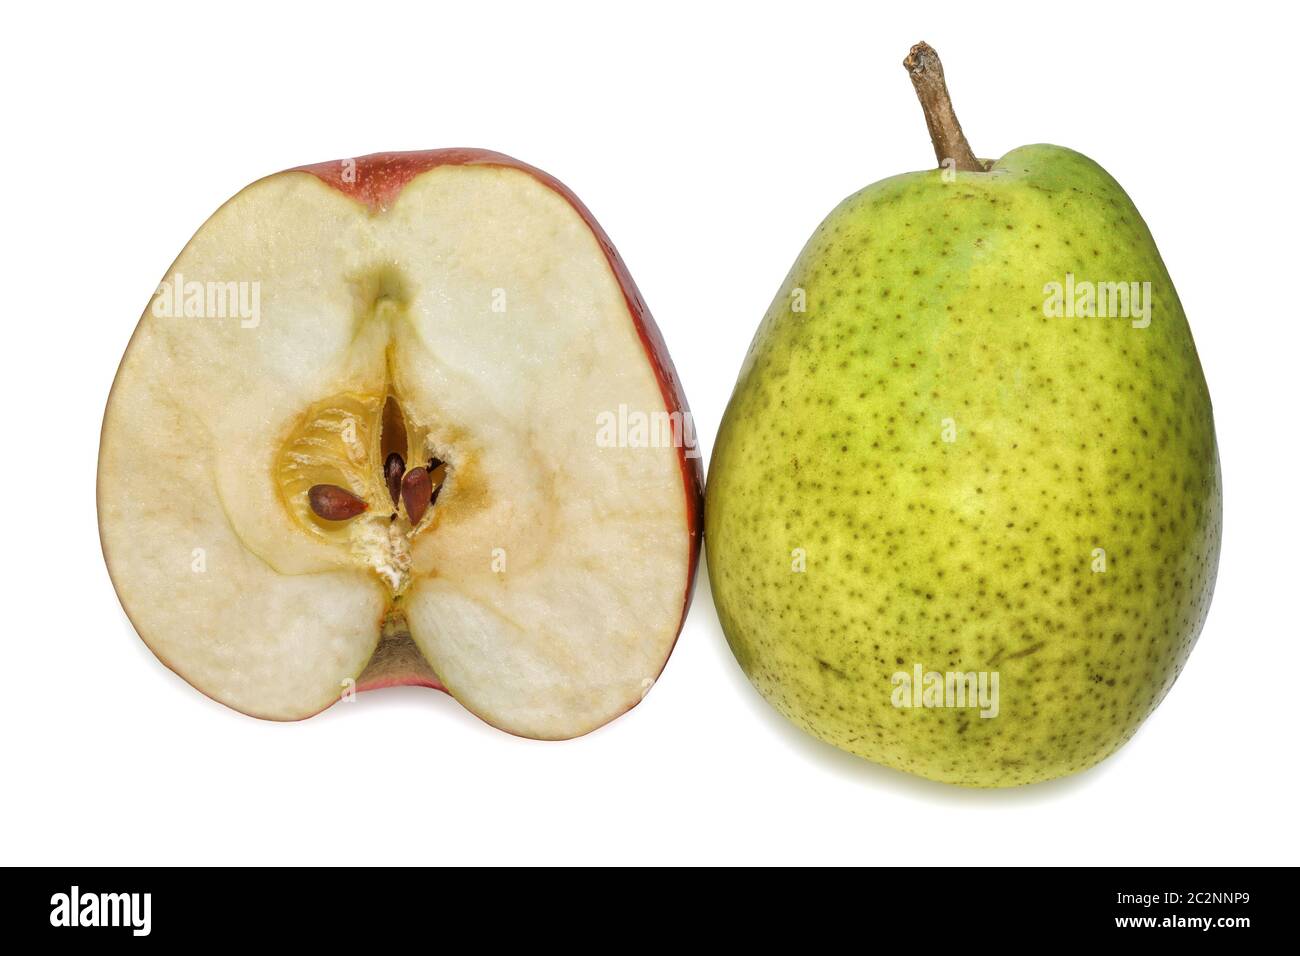 Half apple and pear Stock Photo